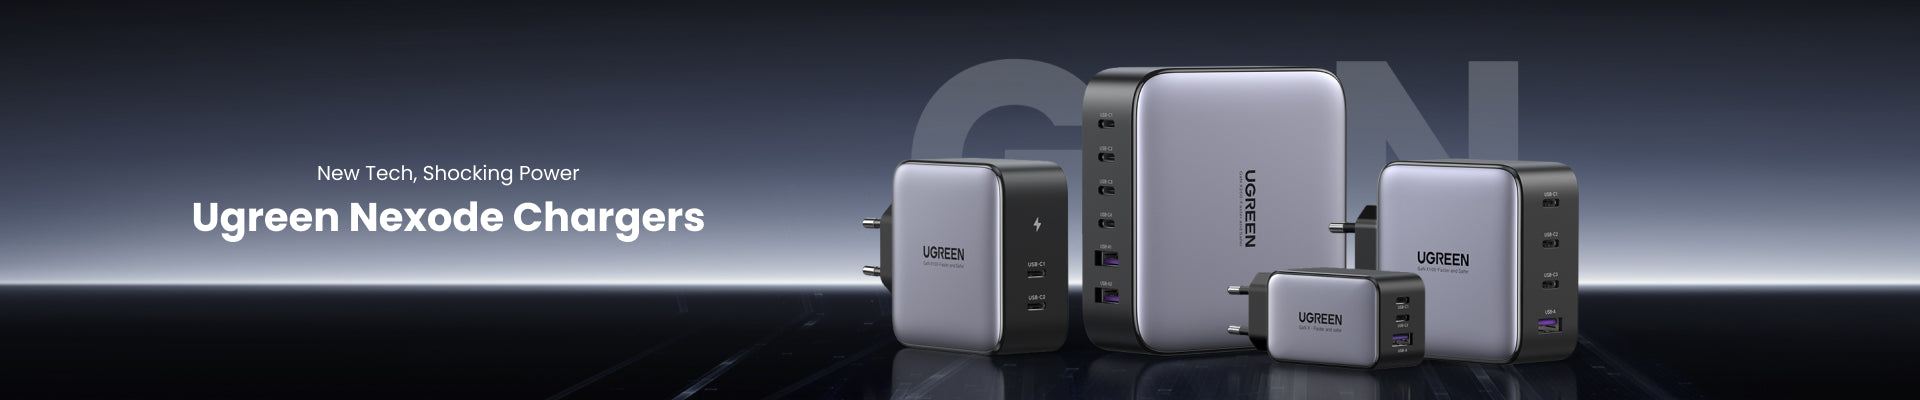 Ugreen: GaN Charger, 4 USB-C - Unleash the Power of Simultaneous Charging! 14